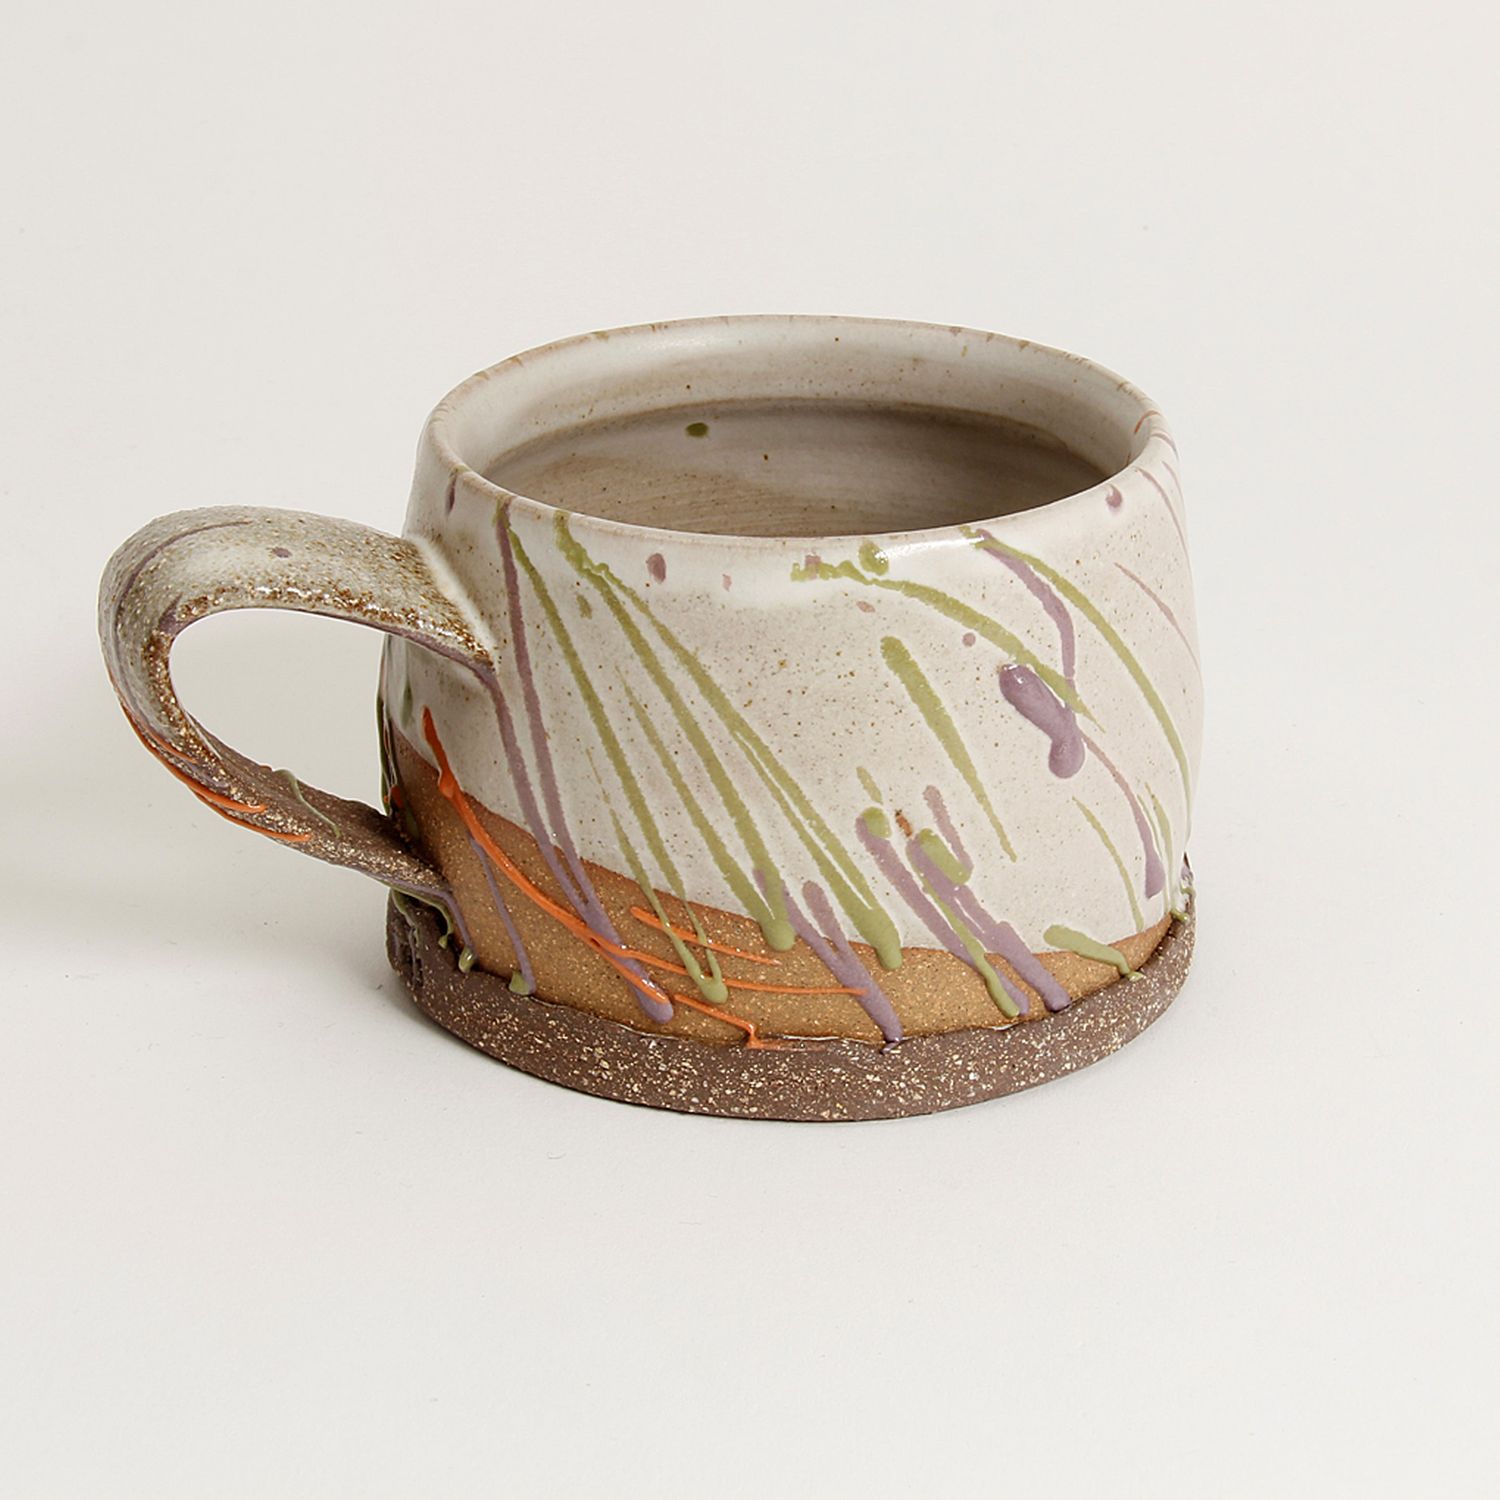 Gracia Isabel Gomez: “Tealicious” Brown Chocolate Mug with Colours Product Image 6 of 6